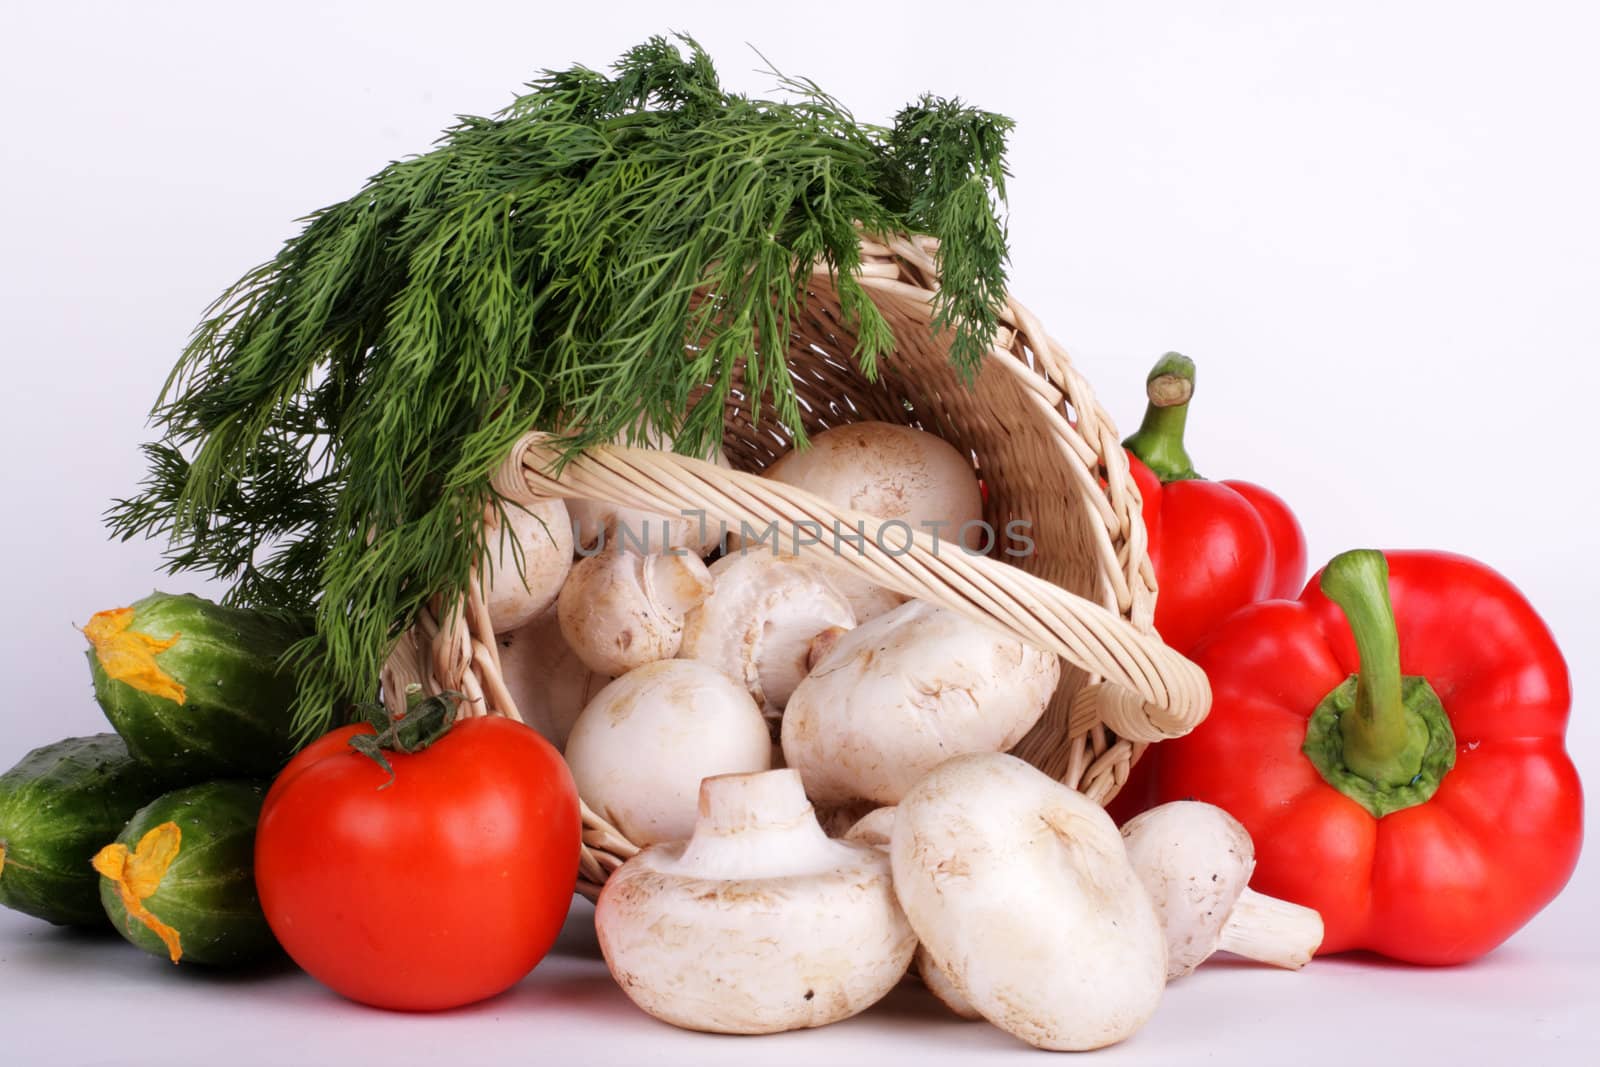 mushrooms, cucumbers, tomato and dill with basket on white by Dushenina